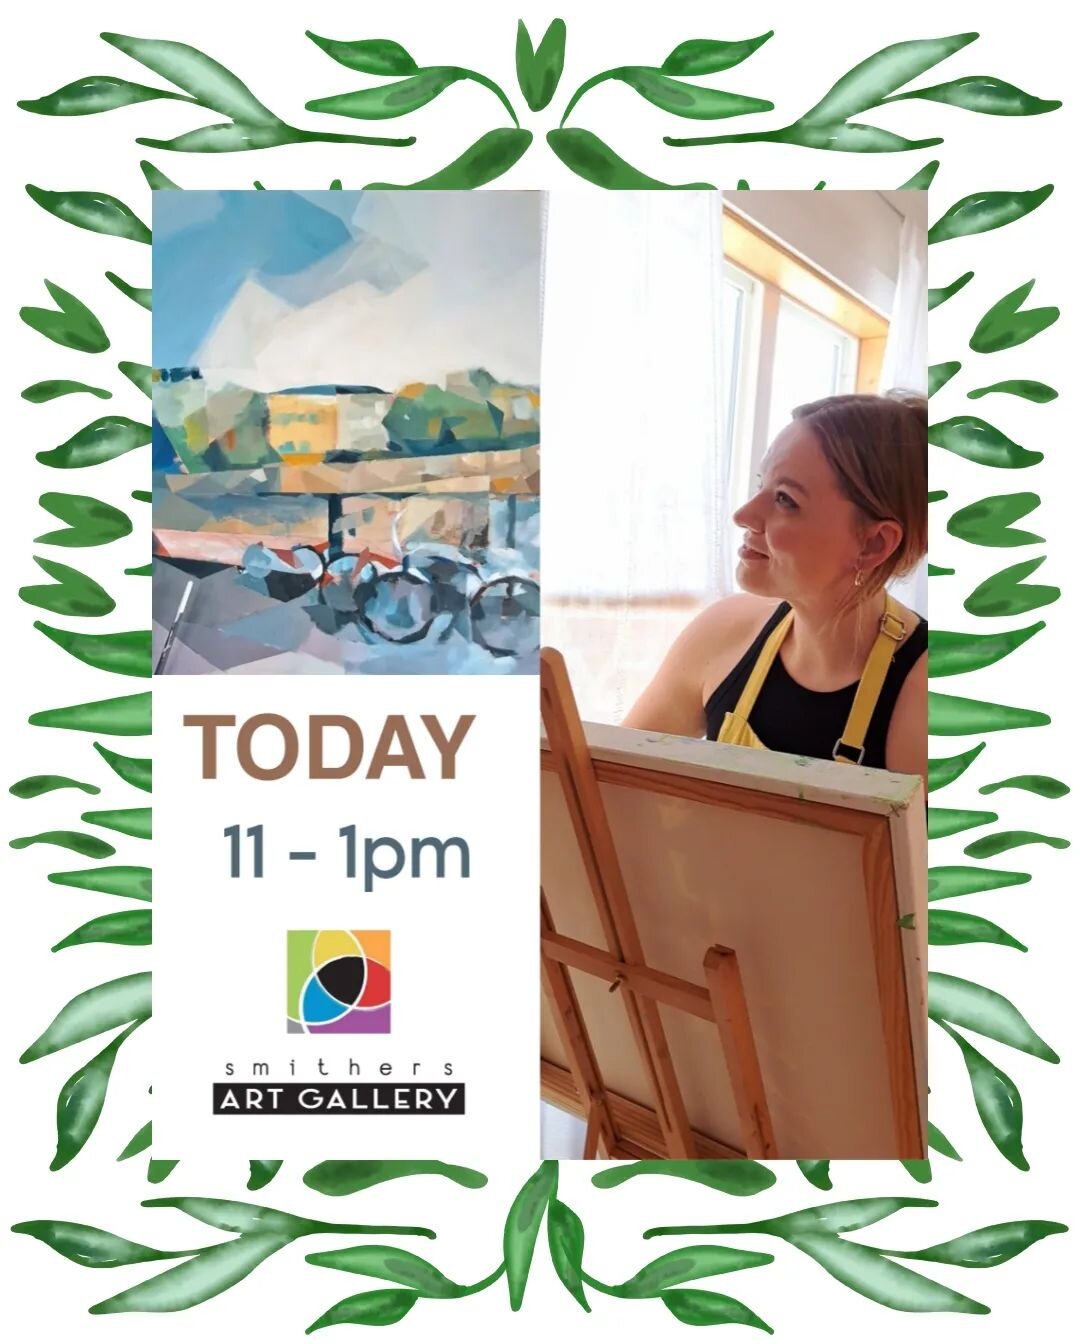 Pop in and visit me at the Smithers Art Gallery today! I'll be working on my latest painting and love to chat! #galleryvisit